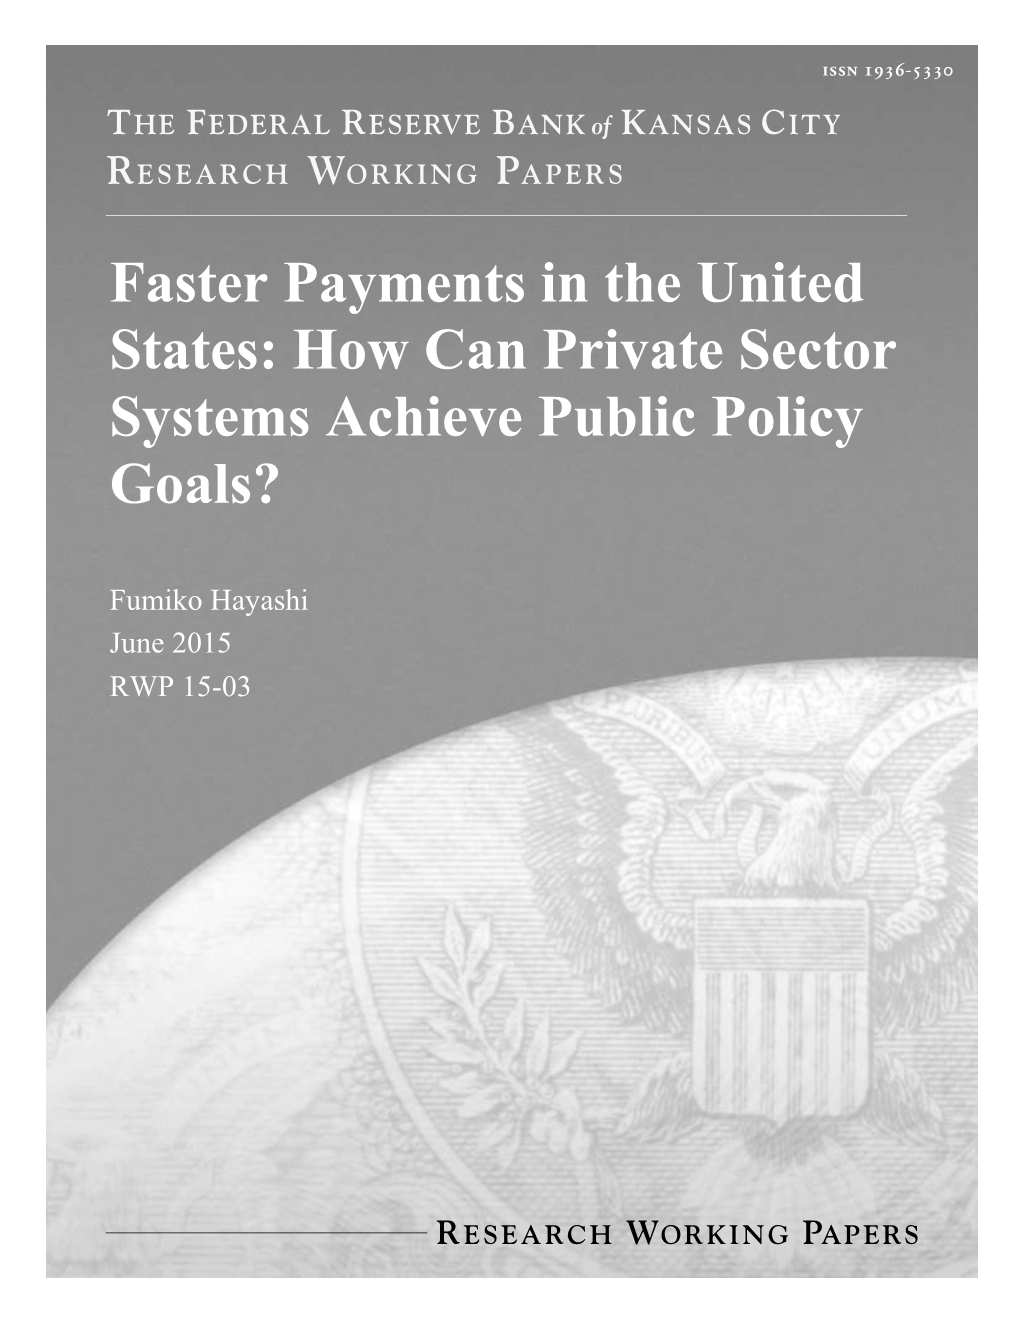 How Can Private Sector Systems Achieve Public Policy Goals?